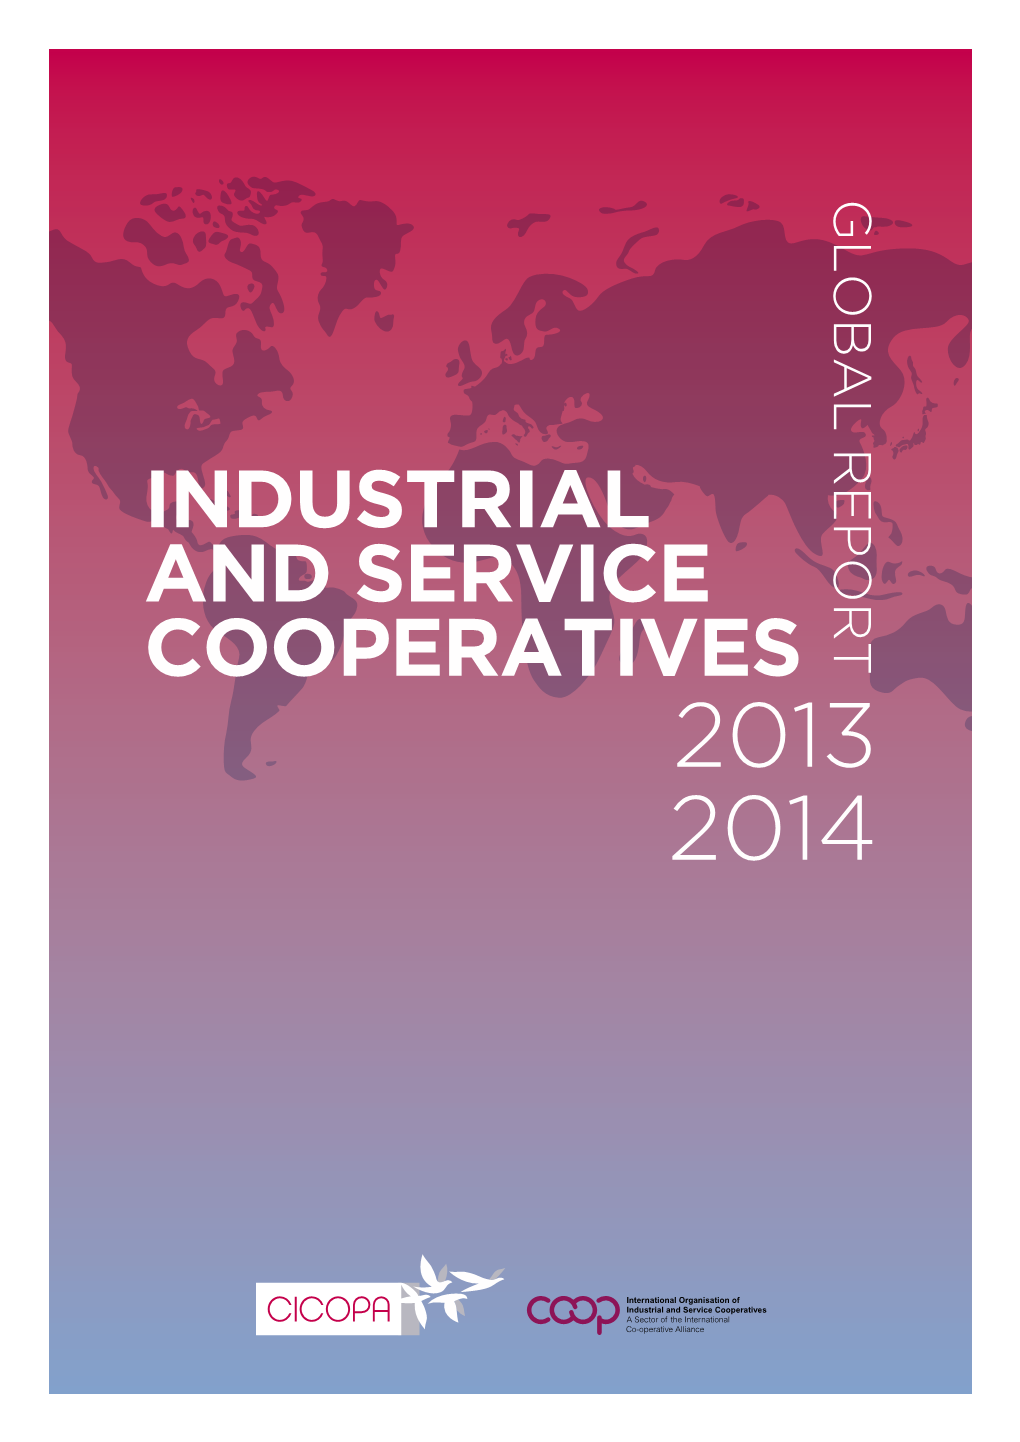 Industrial and Service Cooperatives 2013 - 2014 Index